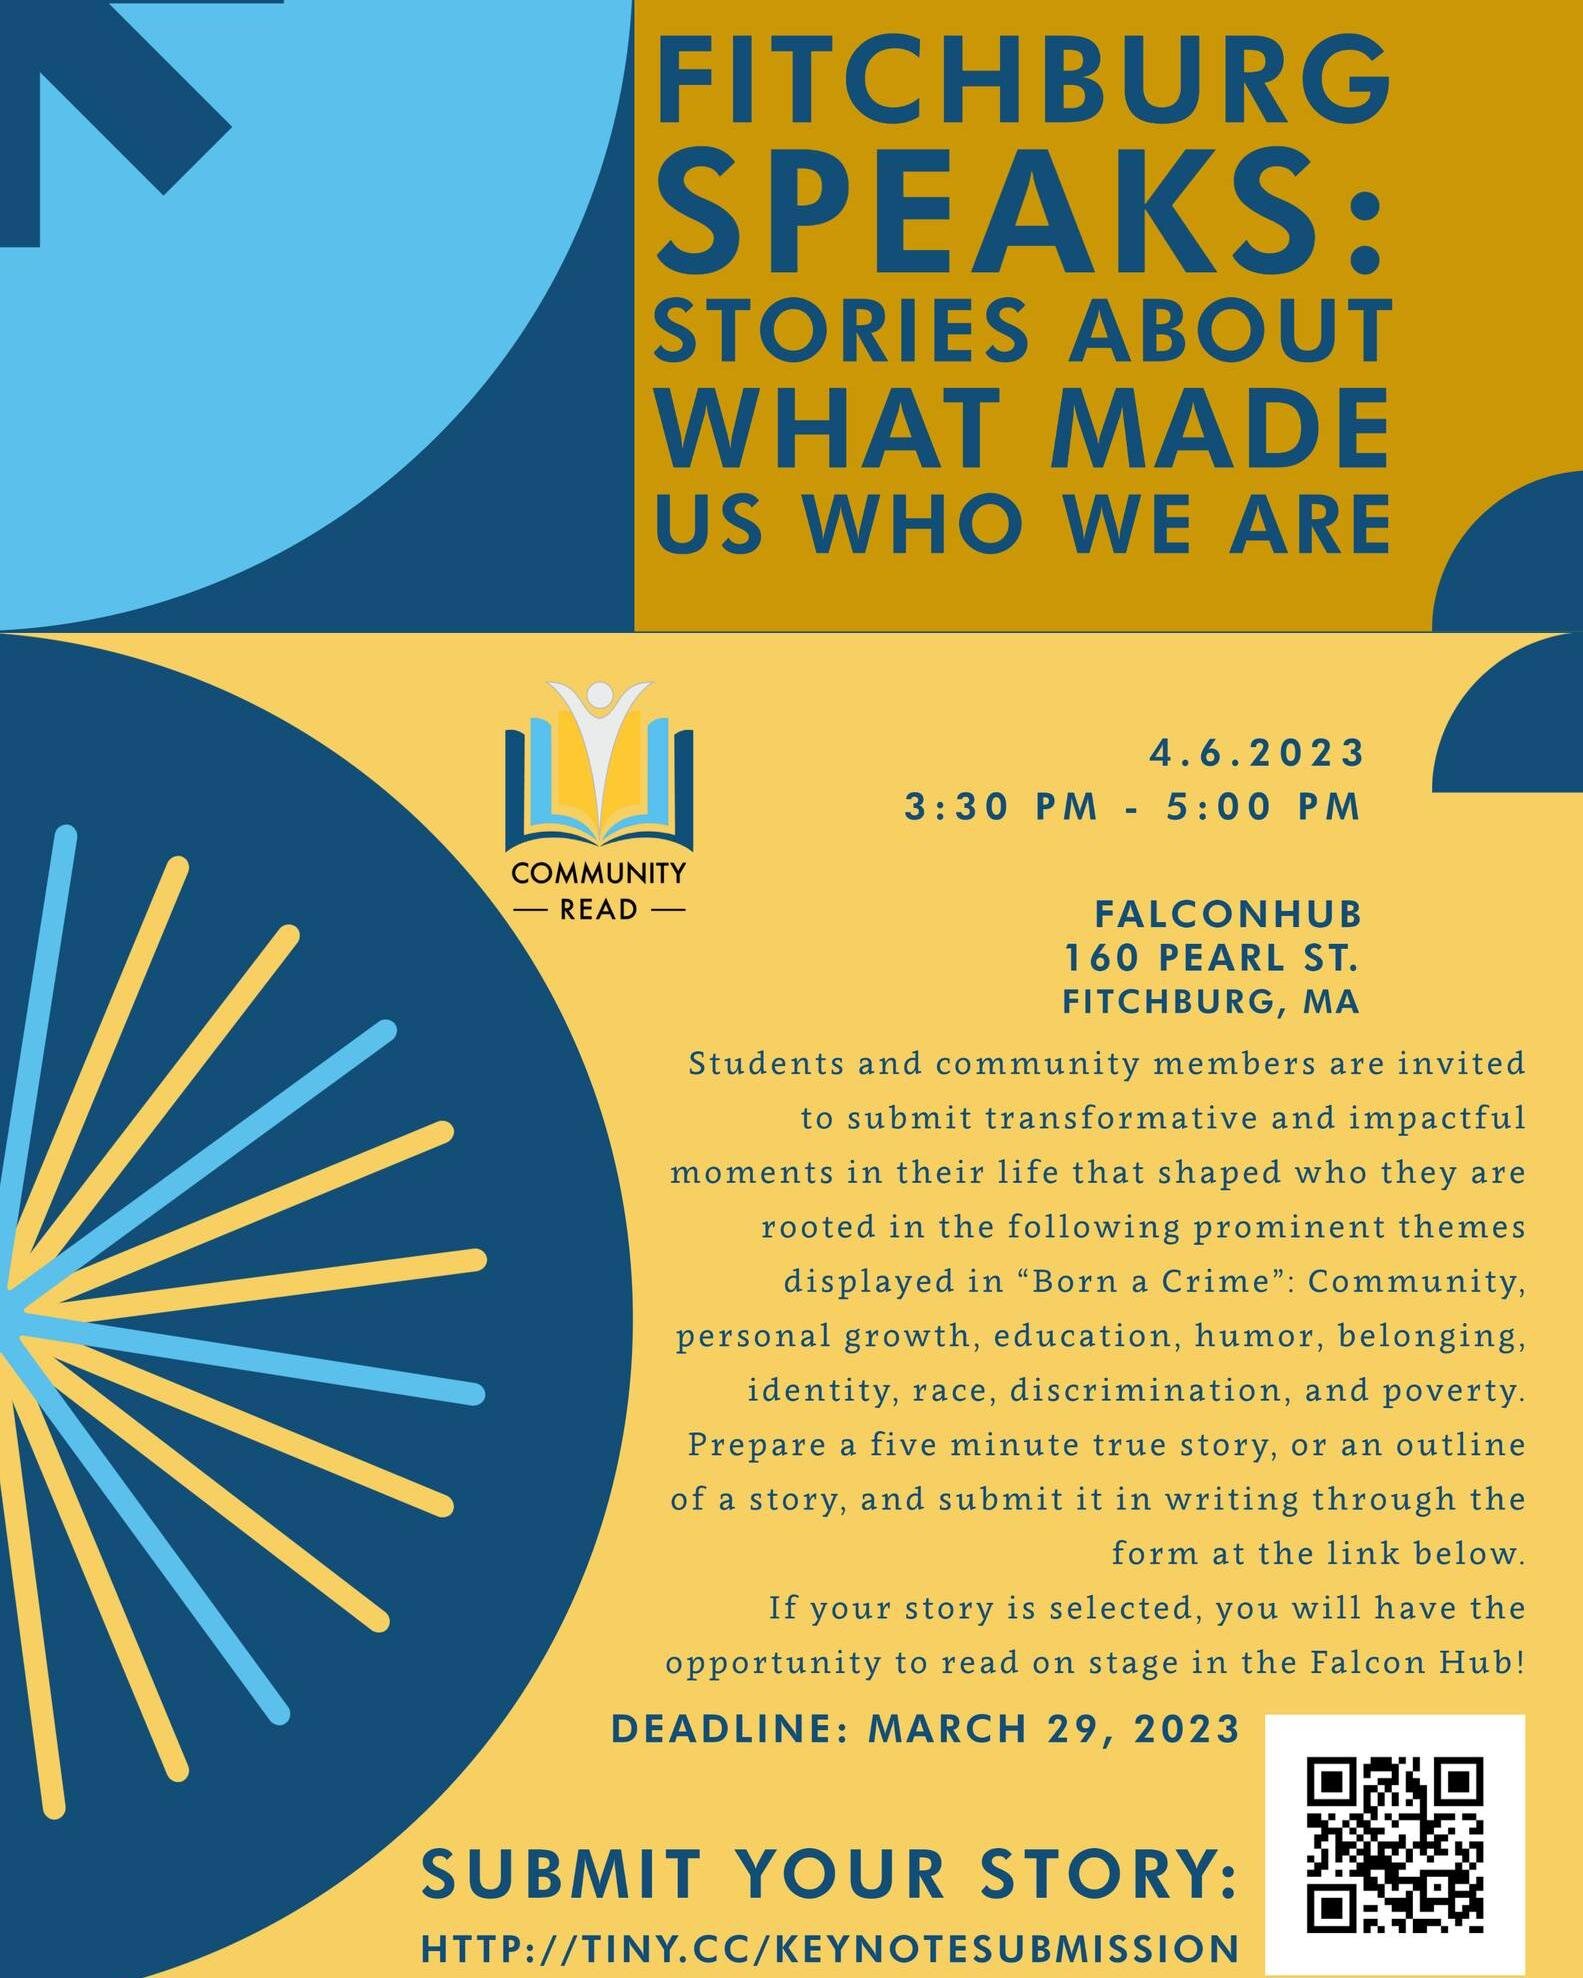 CALLING ALL STORYTELLERS! This is YOUR chance to be featured at our keynote event on April 6, Fitchburg Speaks: Stories About What Made Us Who We Are. 

Students and community members are invited to submit transformative and impactful moments in thei